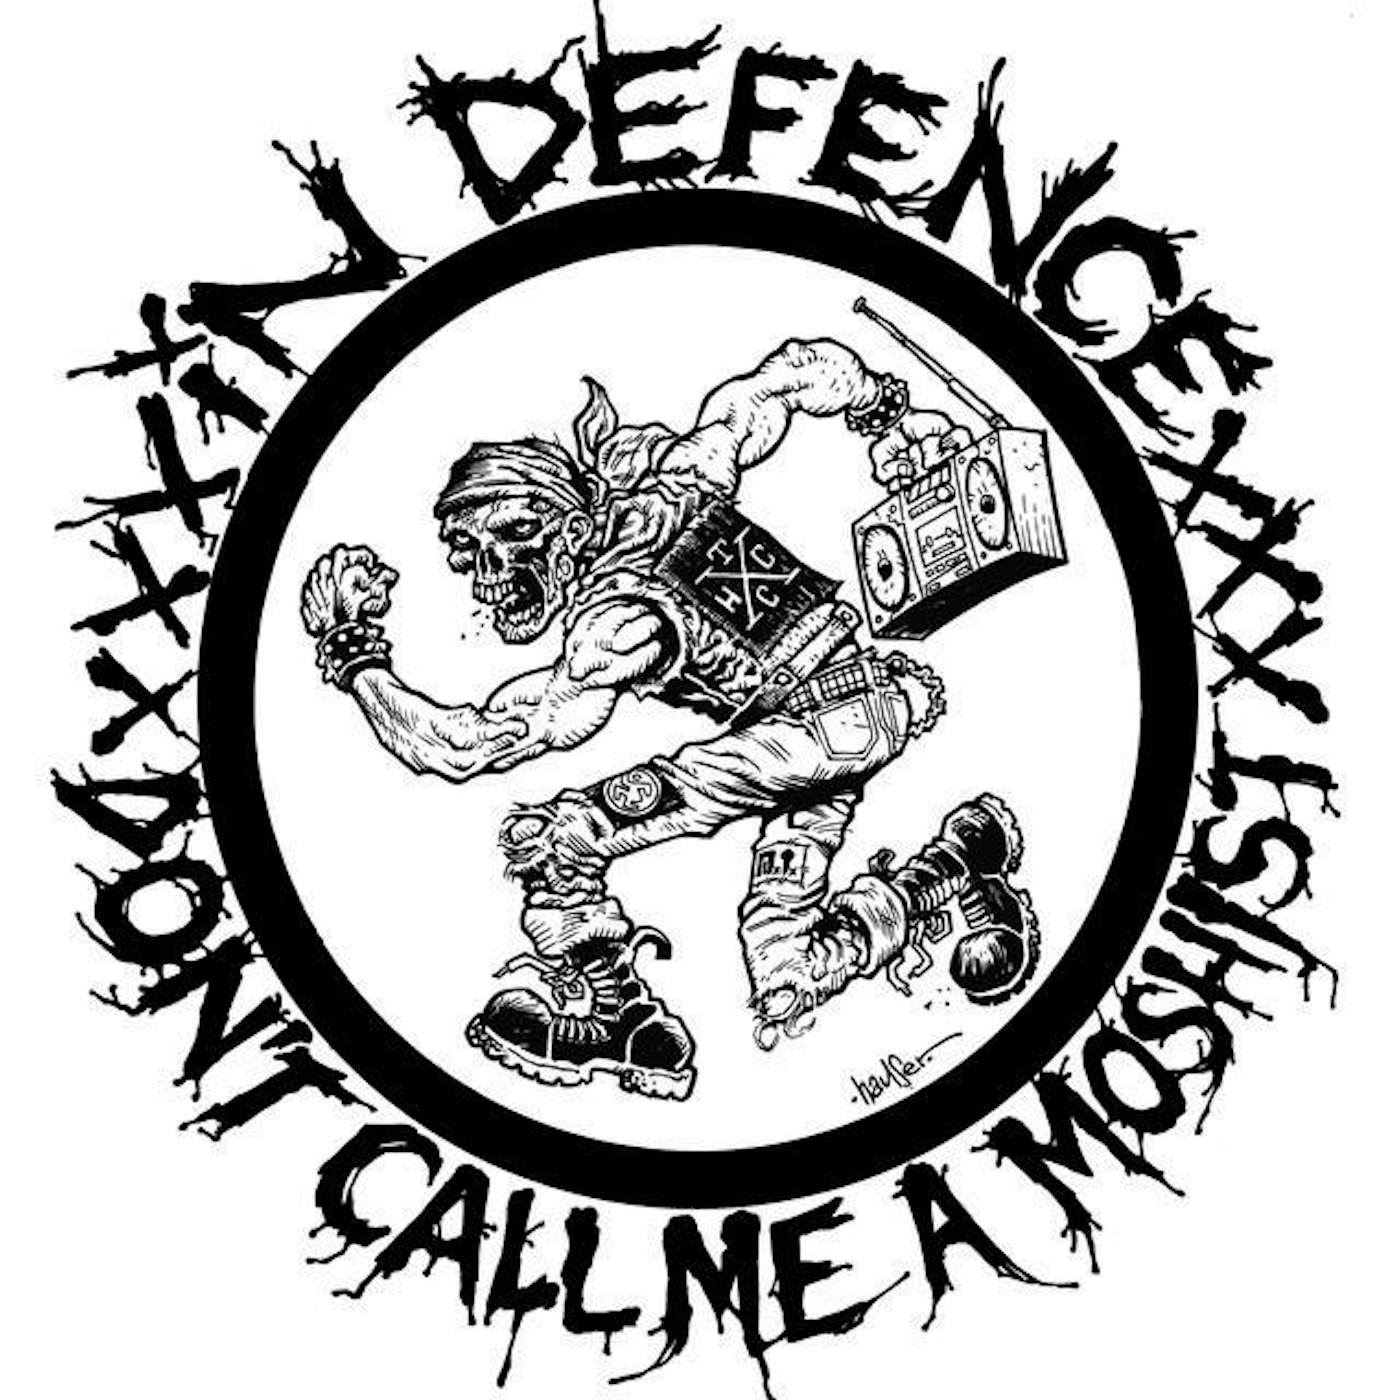 In Defence